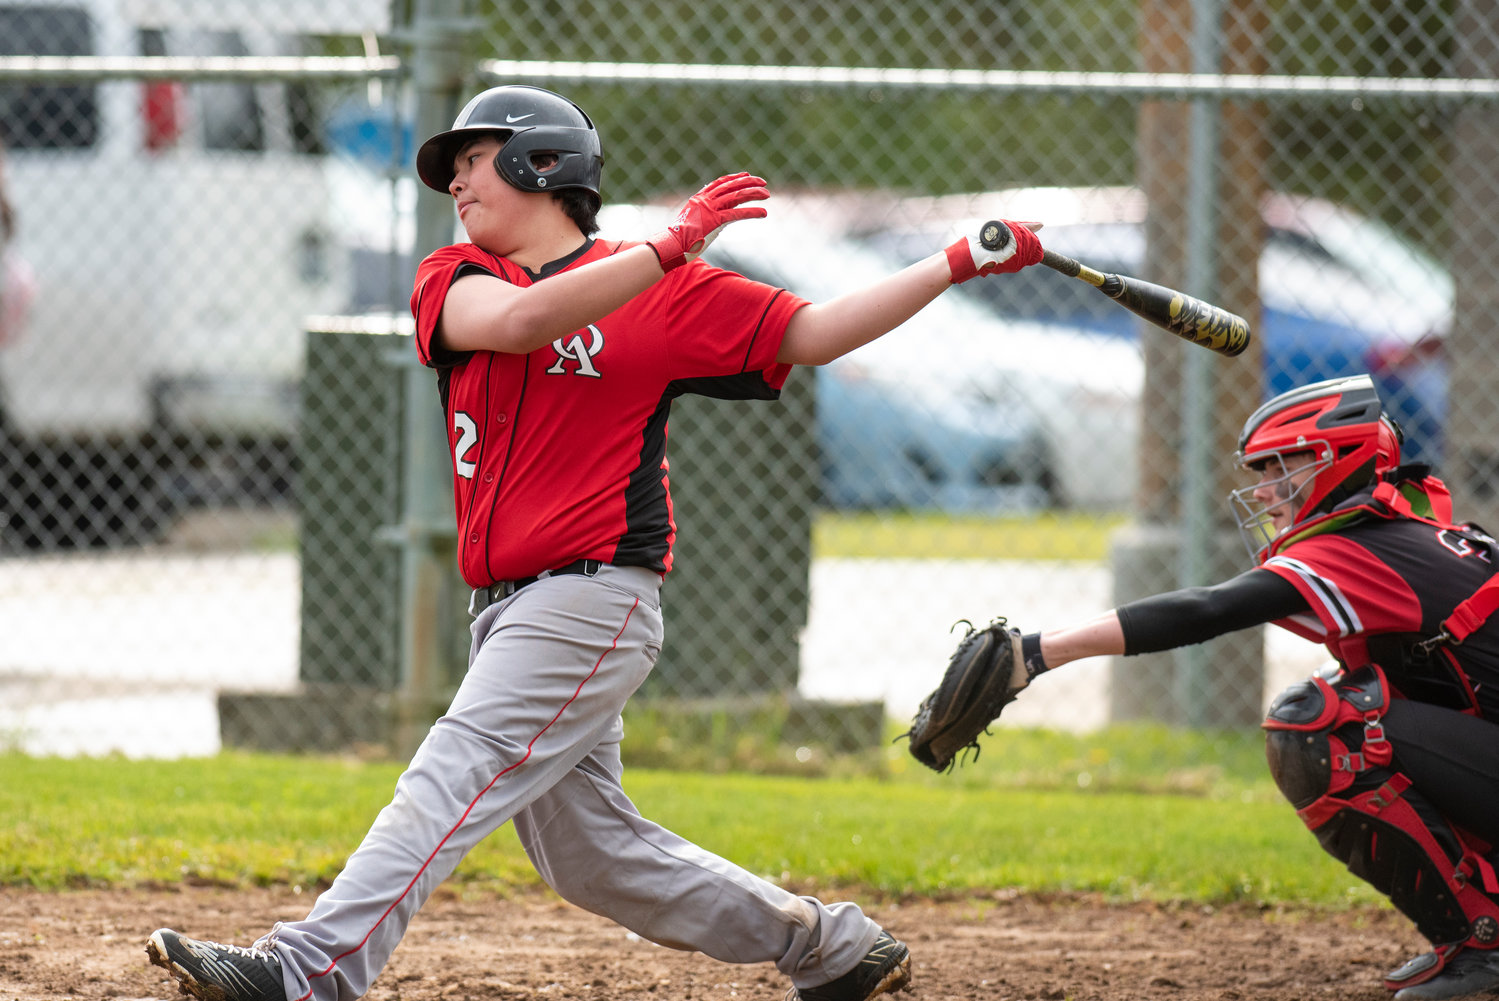 An Oakville batter takes a cut at a Mossyrock pitch during a home game at Legends Field Complex on April 28.